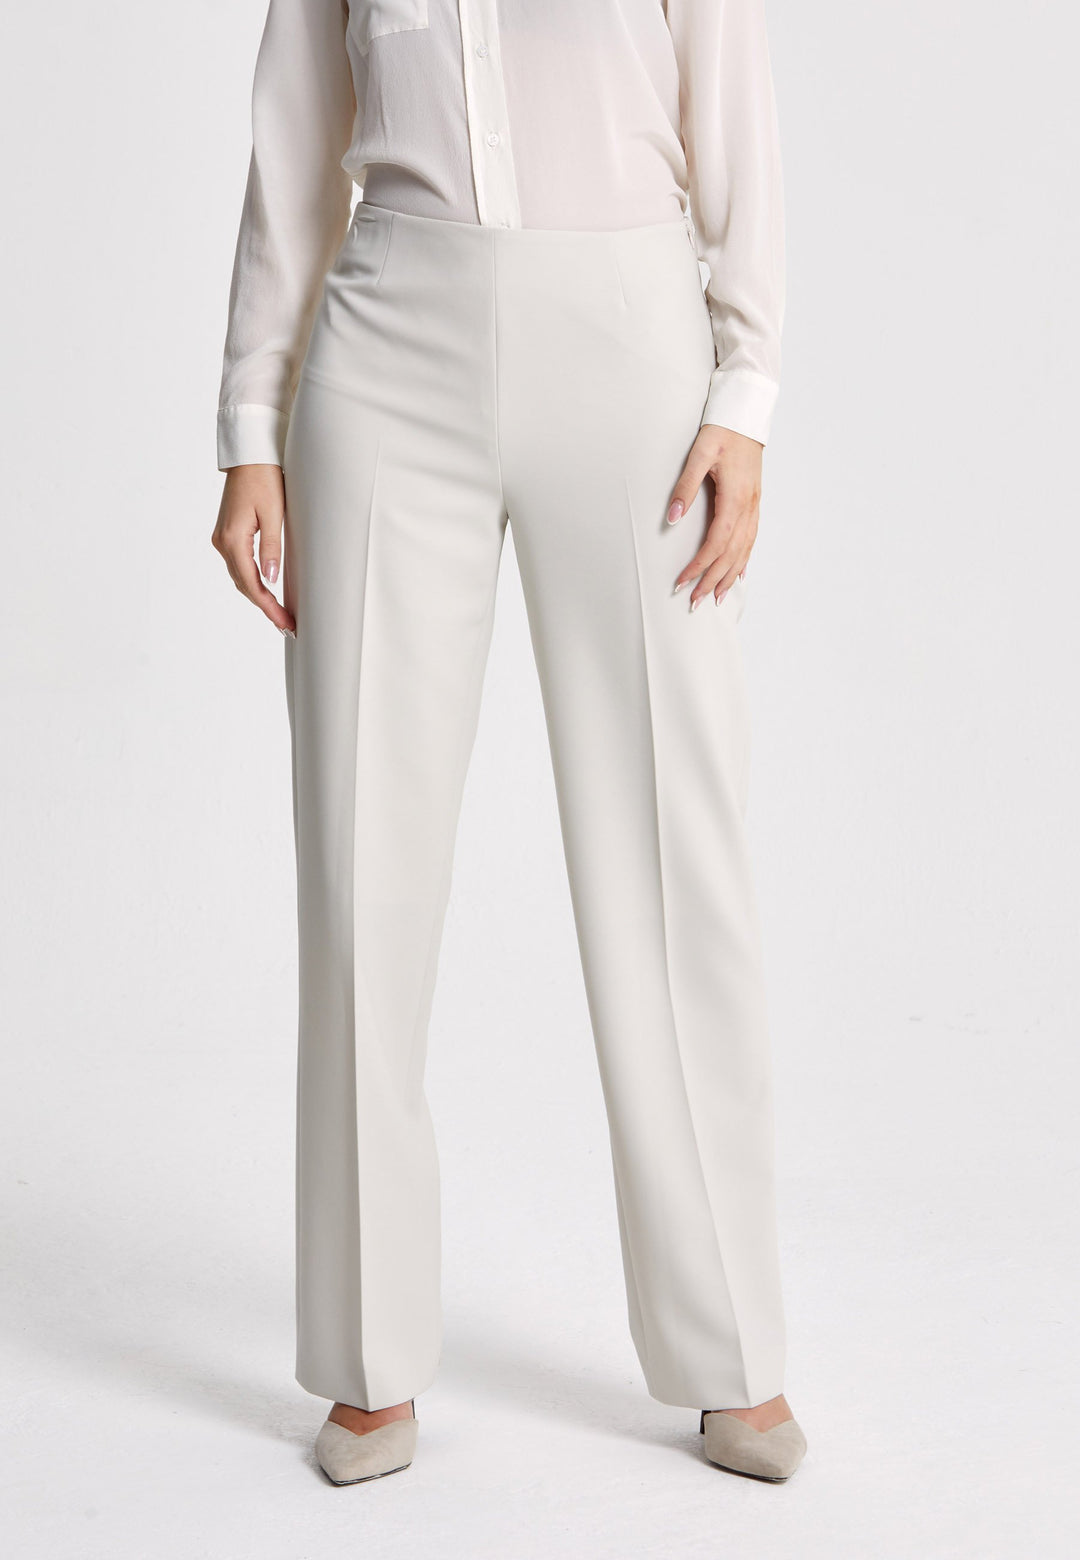 Investment-worthy, easy-fitting flat front pant. Relaxed straight leg crafted in a fluid tricotine. A wardrobe staple and HMcA classic. This fabric is made with a hint of elastane to ensure comfort and ease of movement. Shown here in a sophisticated neutral. Pair with a simple tee for workwear appeal or elevate your look with the coordinating blazer.